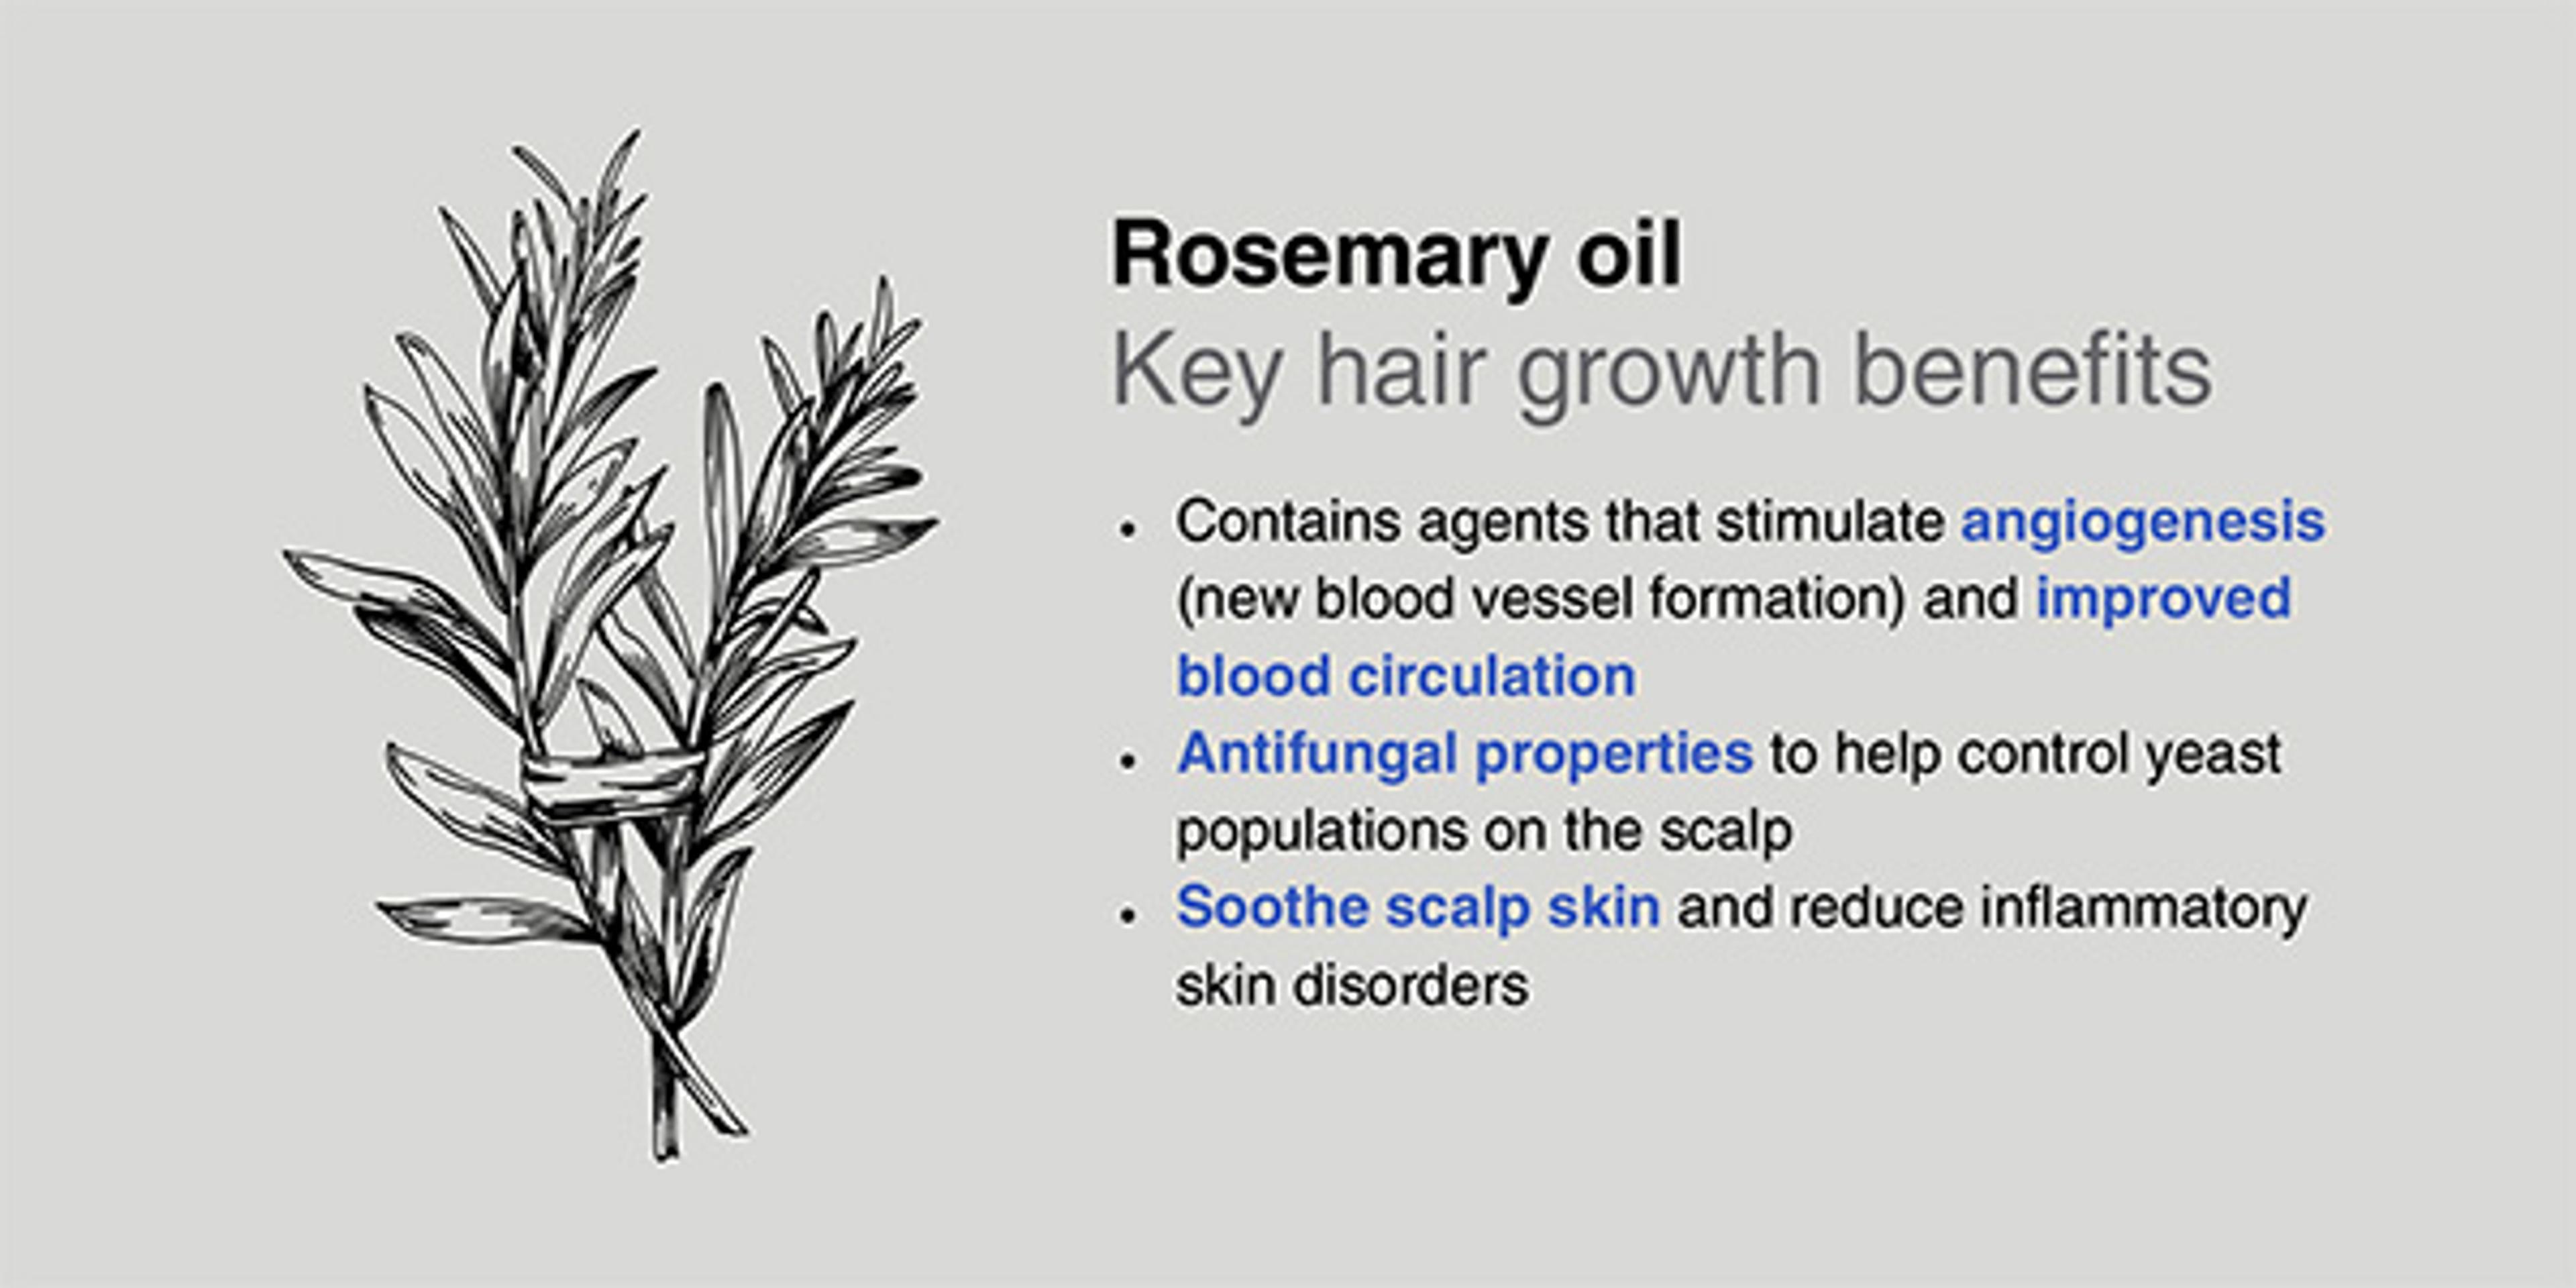 Benefits of rosemary oil for hair growth include angiogenesis, anti-fungal action and scalp soothing.